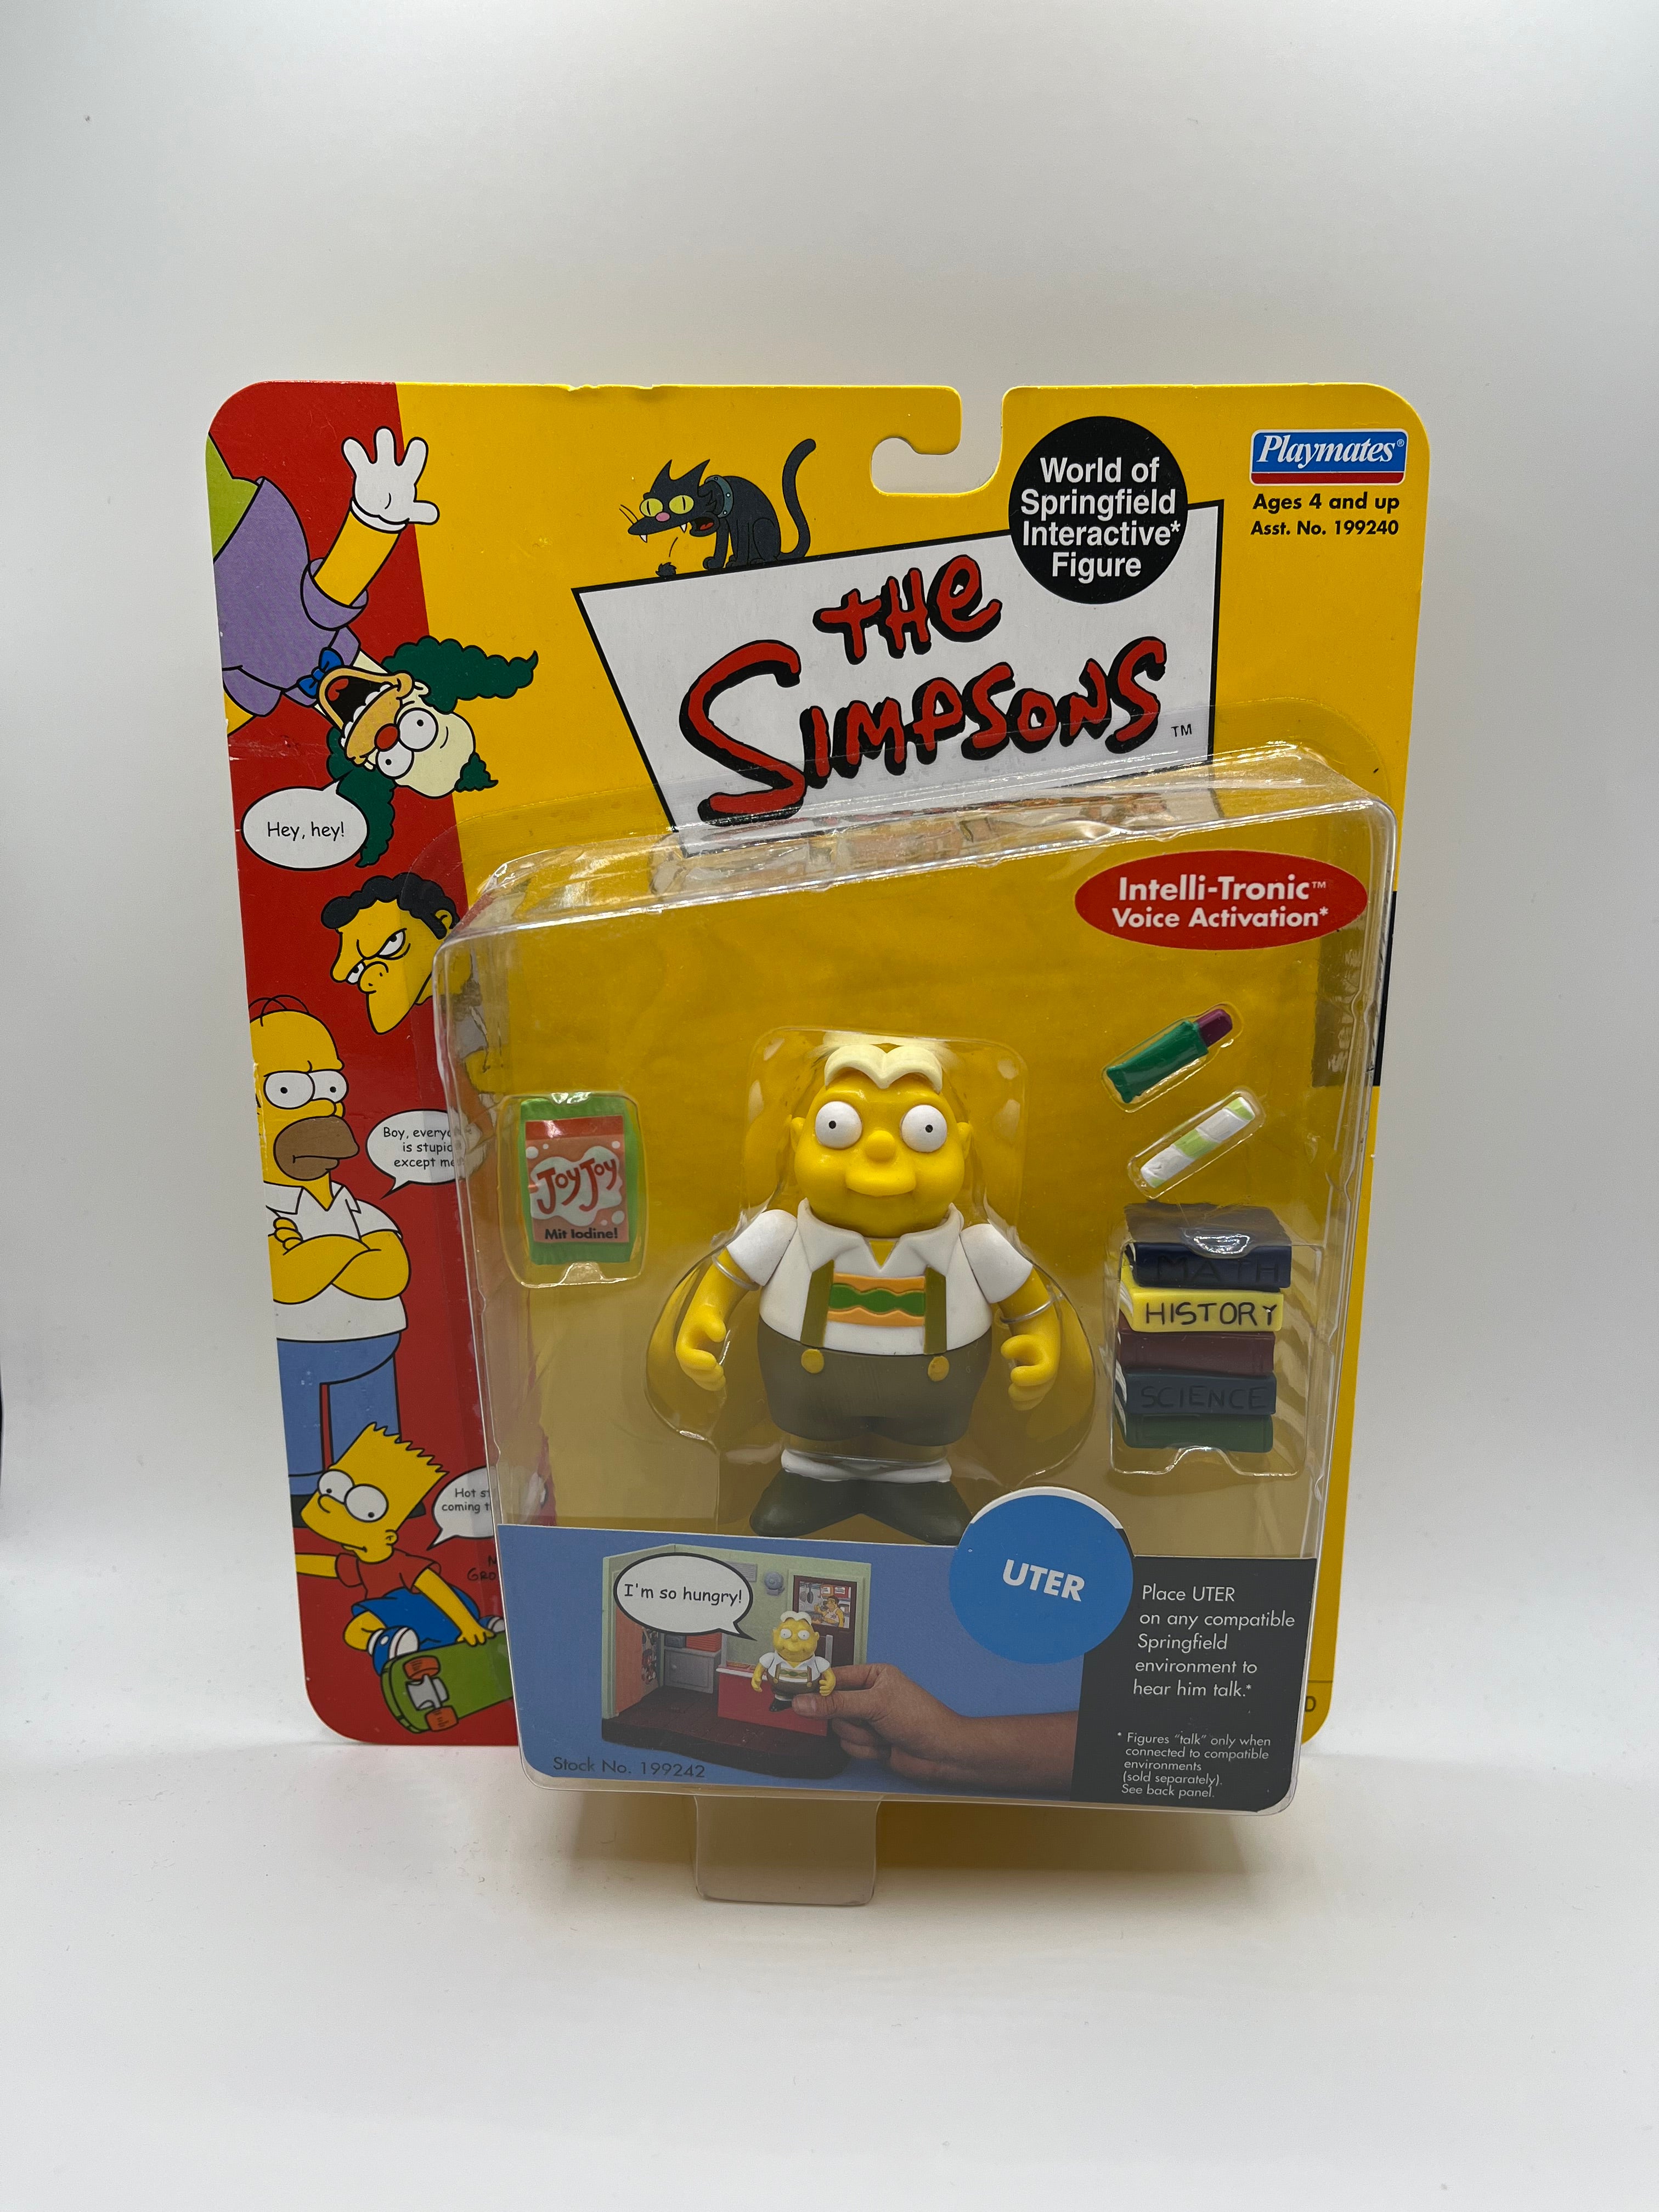 The Simpsons Uter Playmates